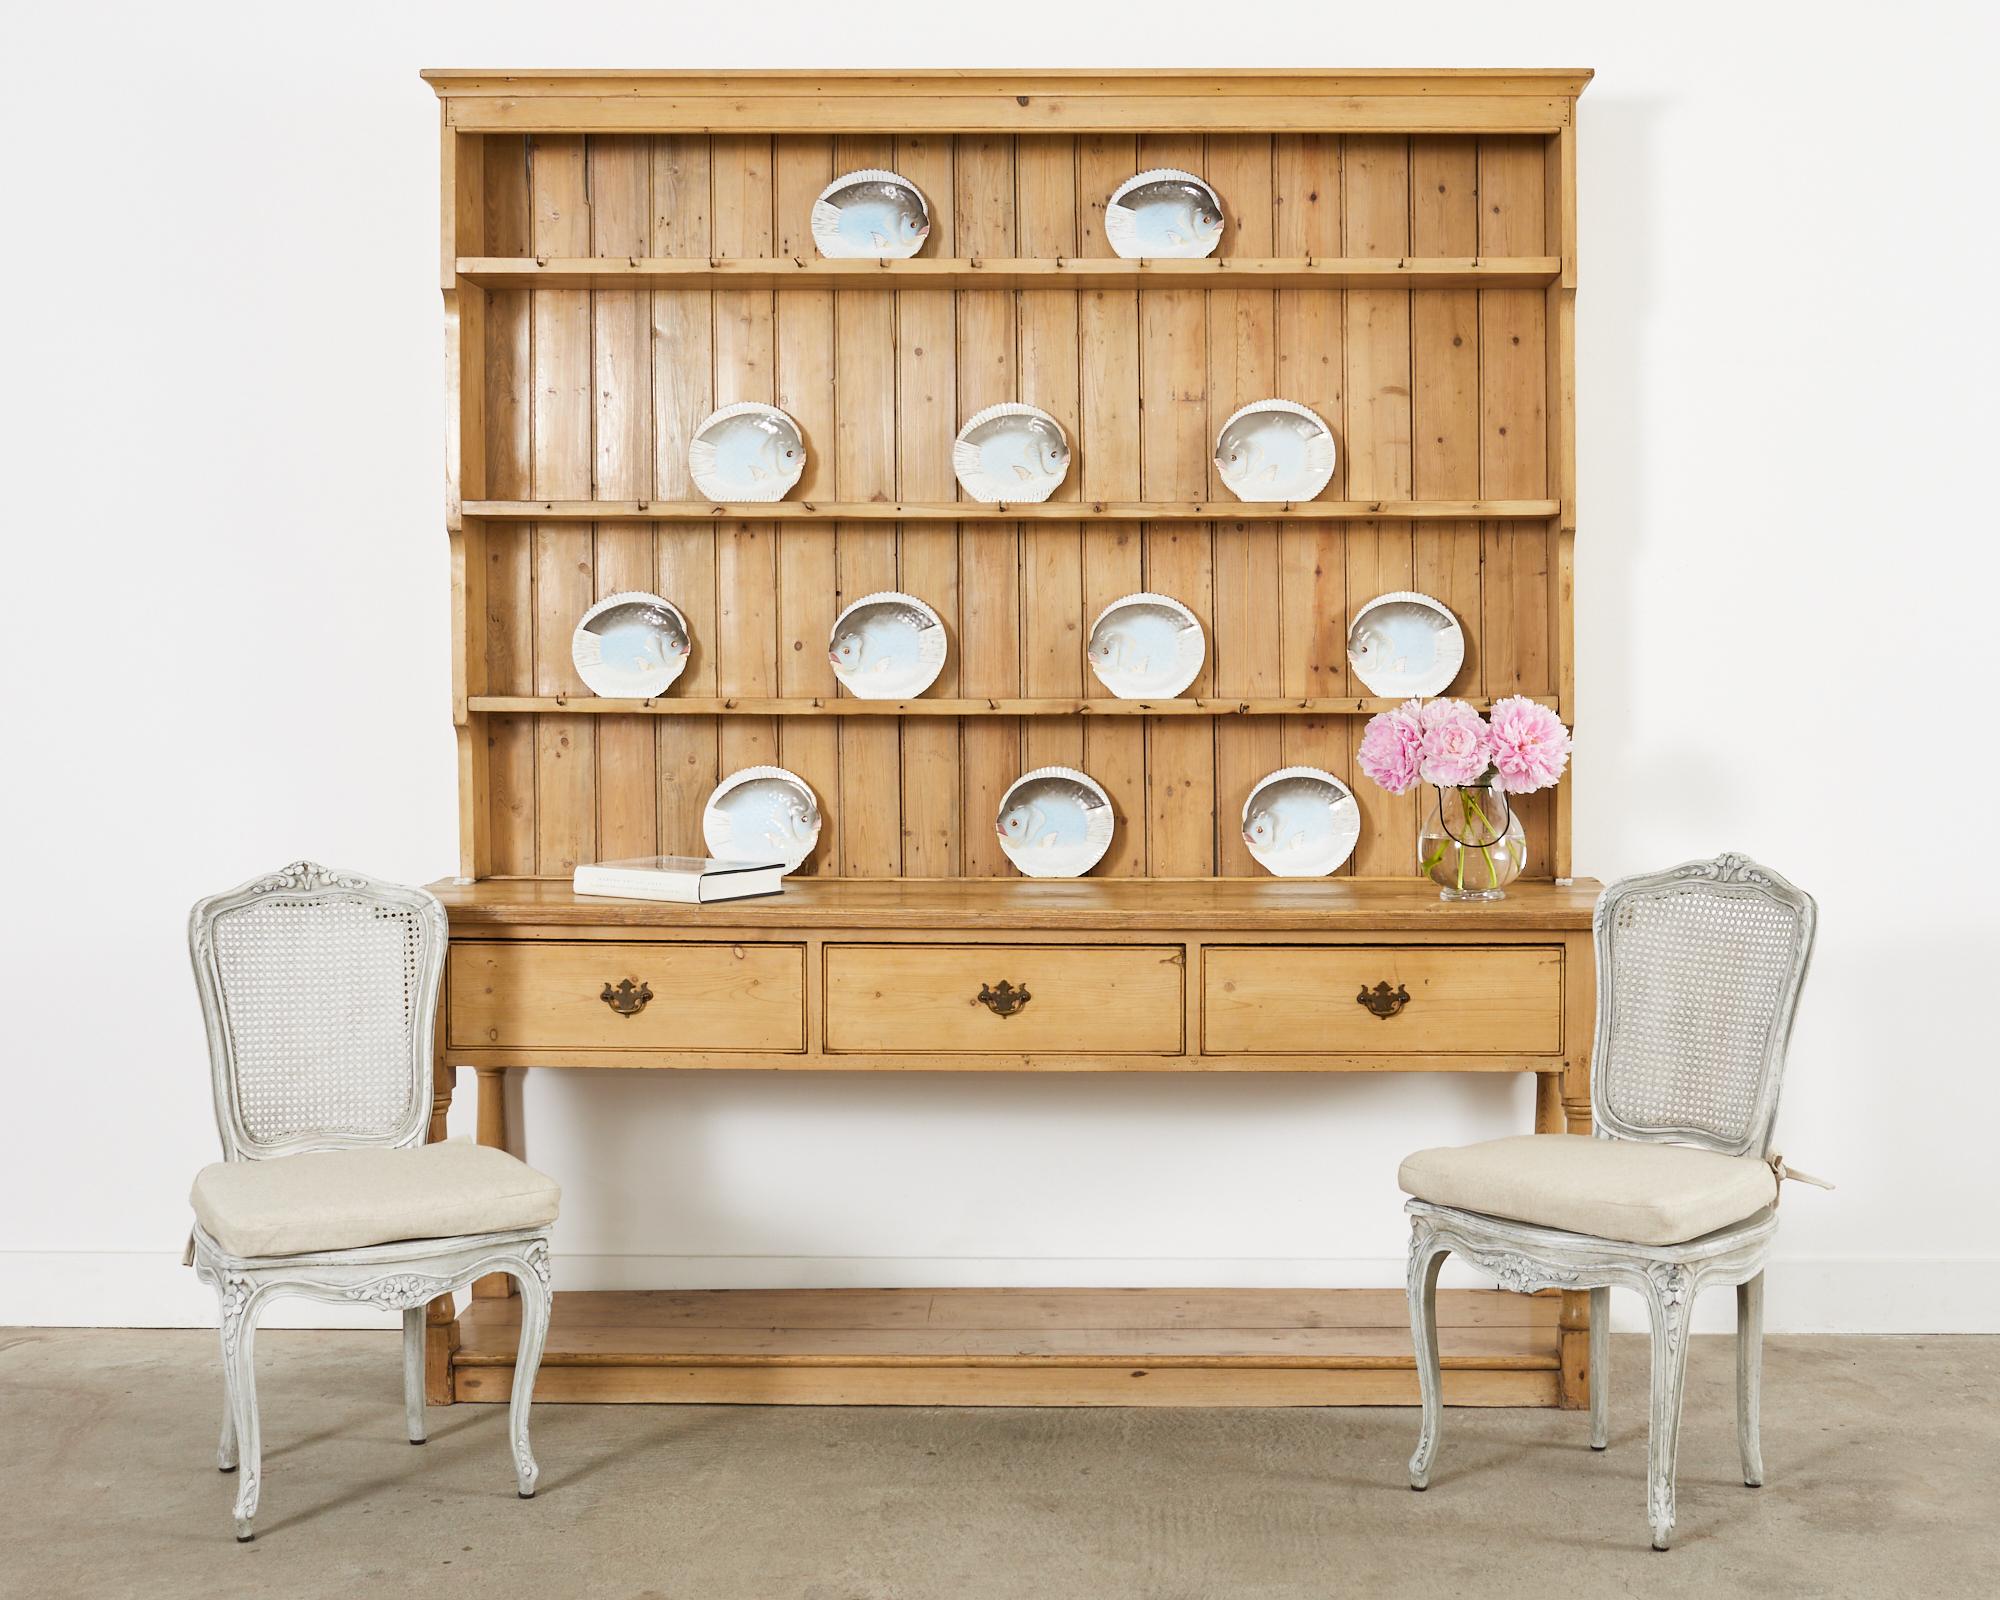 Rustic country English welsh cupboard dresser with pot rack storage crafted from pine. The grand cupboard rack measures 7 feet wide with three plate shelves surmounted by a cornice molding. The dresser is fronted by three large storage drawers with